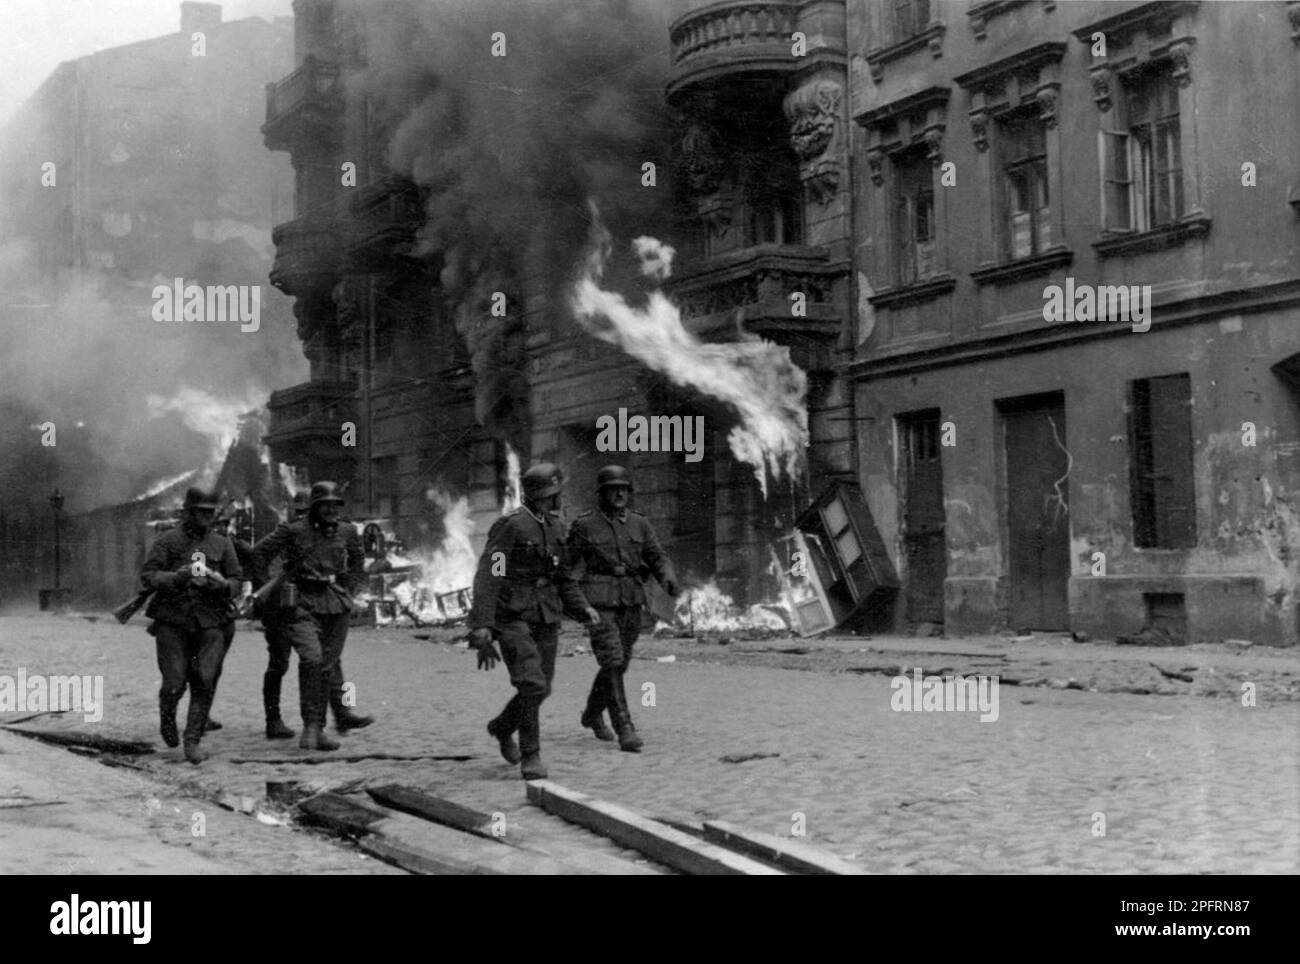 In January 1943 the nazis arrived to round up the Jews of the Warsaw Ghetto  The Jews, resolved to fight it out, took on the SS with homemade and primitive weapons. The defenders were executed or deported and the Ghetto area was systematically demolished. This event is known as The Ghetto Uprising. This image shows a group of German soldiers walking down burning Nowolpie Street. This image is from the German photographic record of the event, known as the Stroop report. Stock Photo